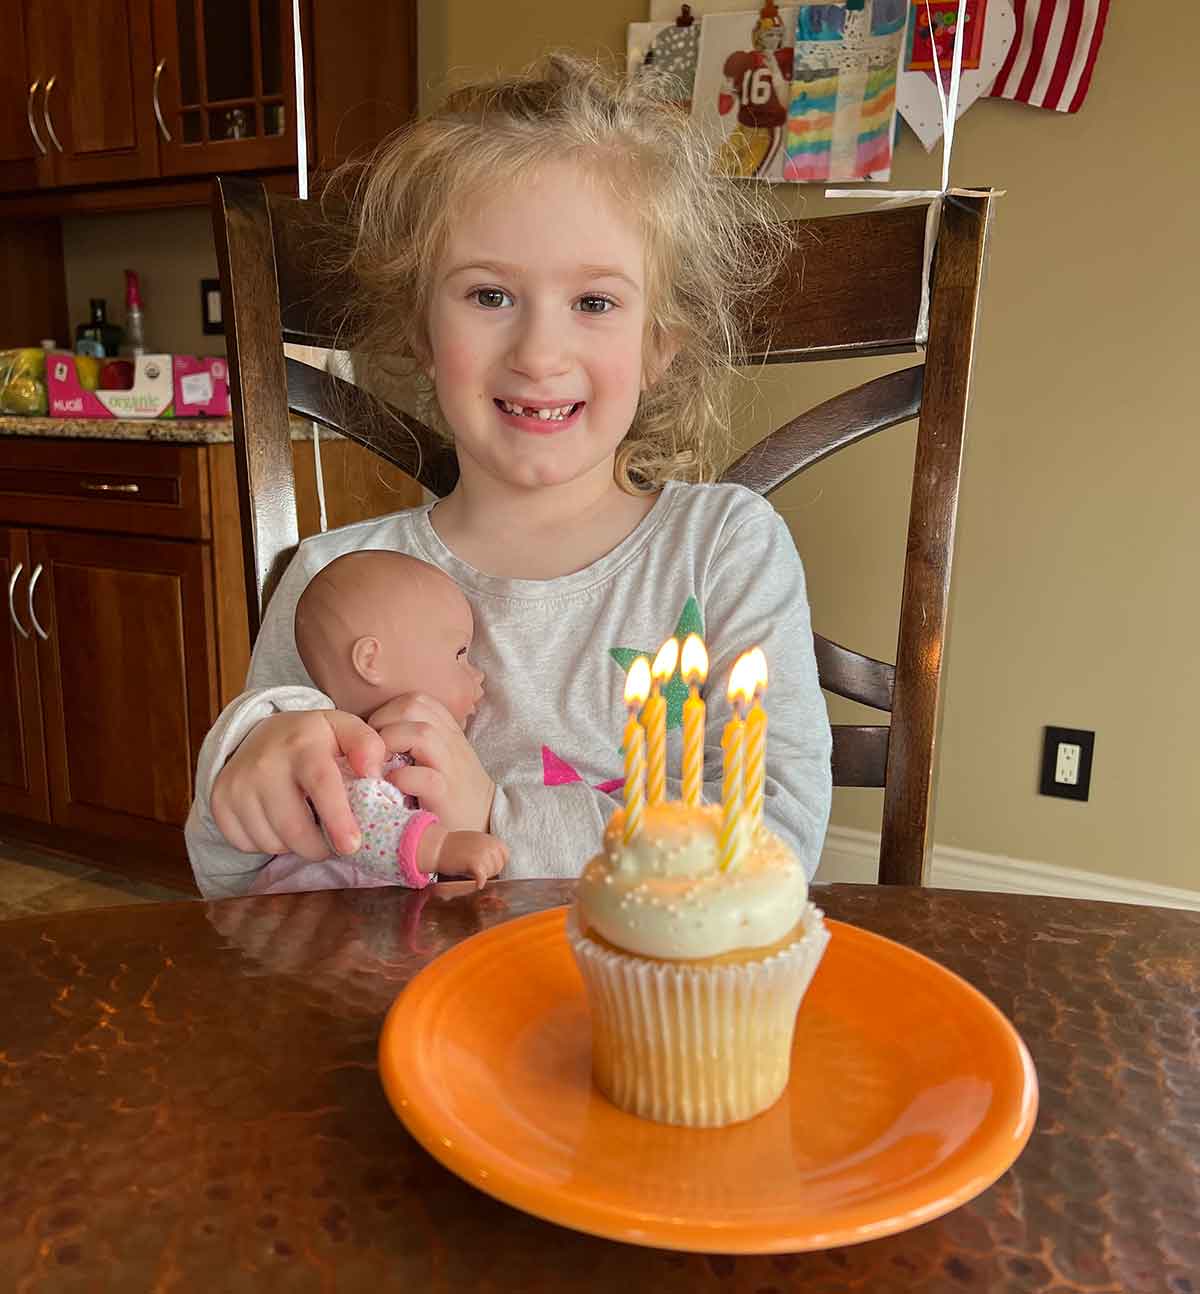 Girl holding a baby doll looking at a cupcake with five candles on an orange plate.